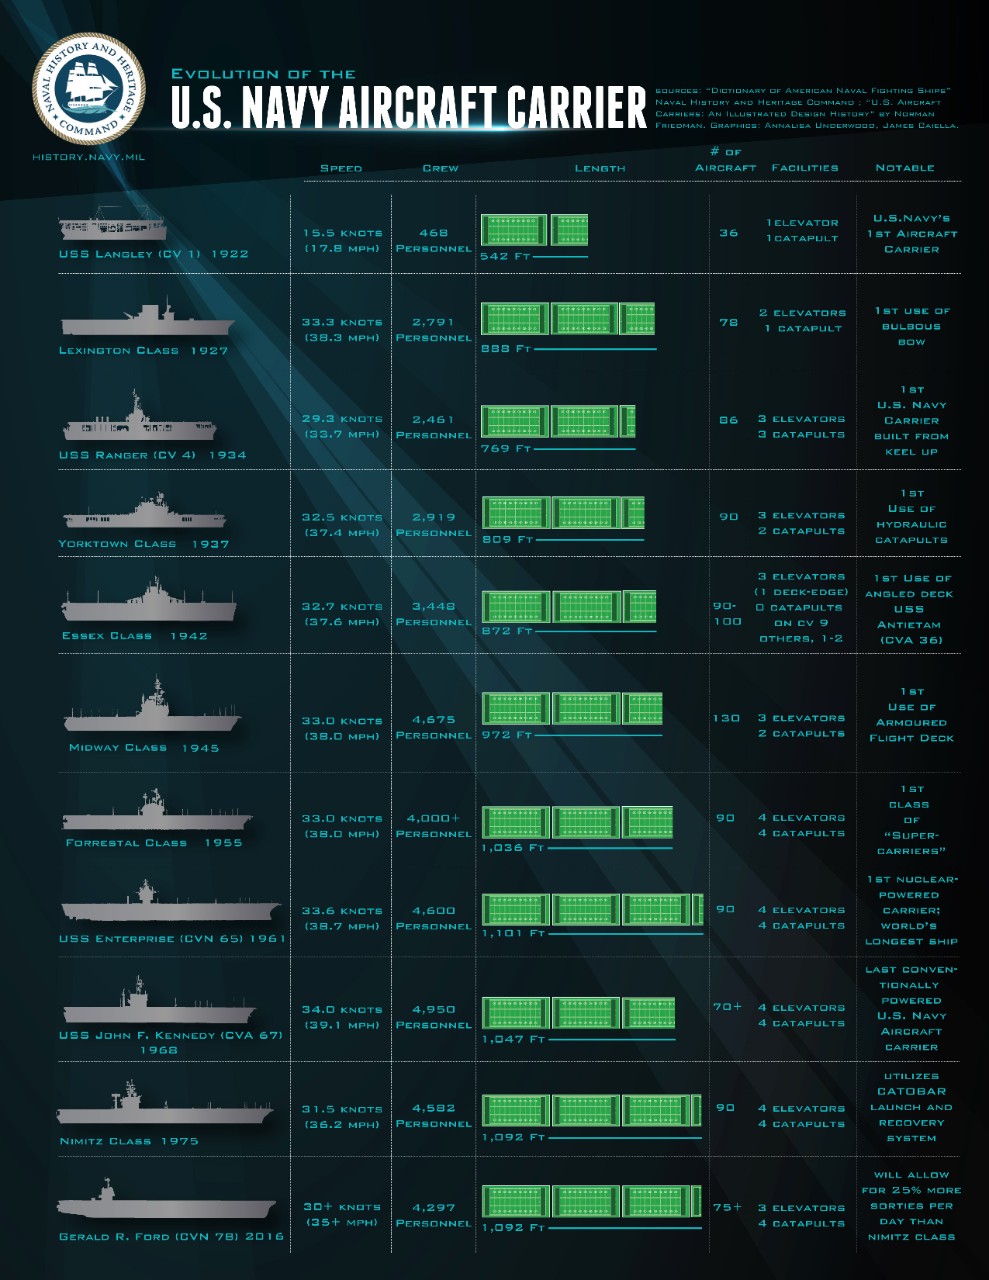 Evolution of the Aircraft Carrier